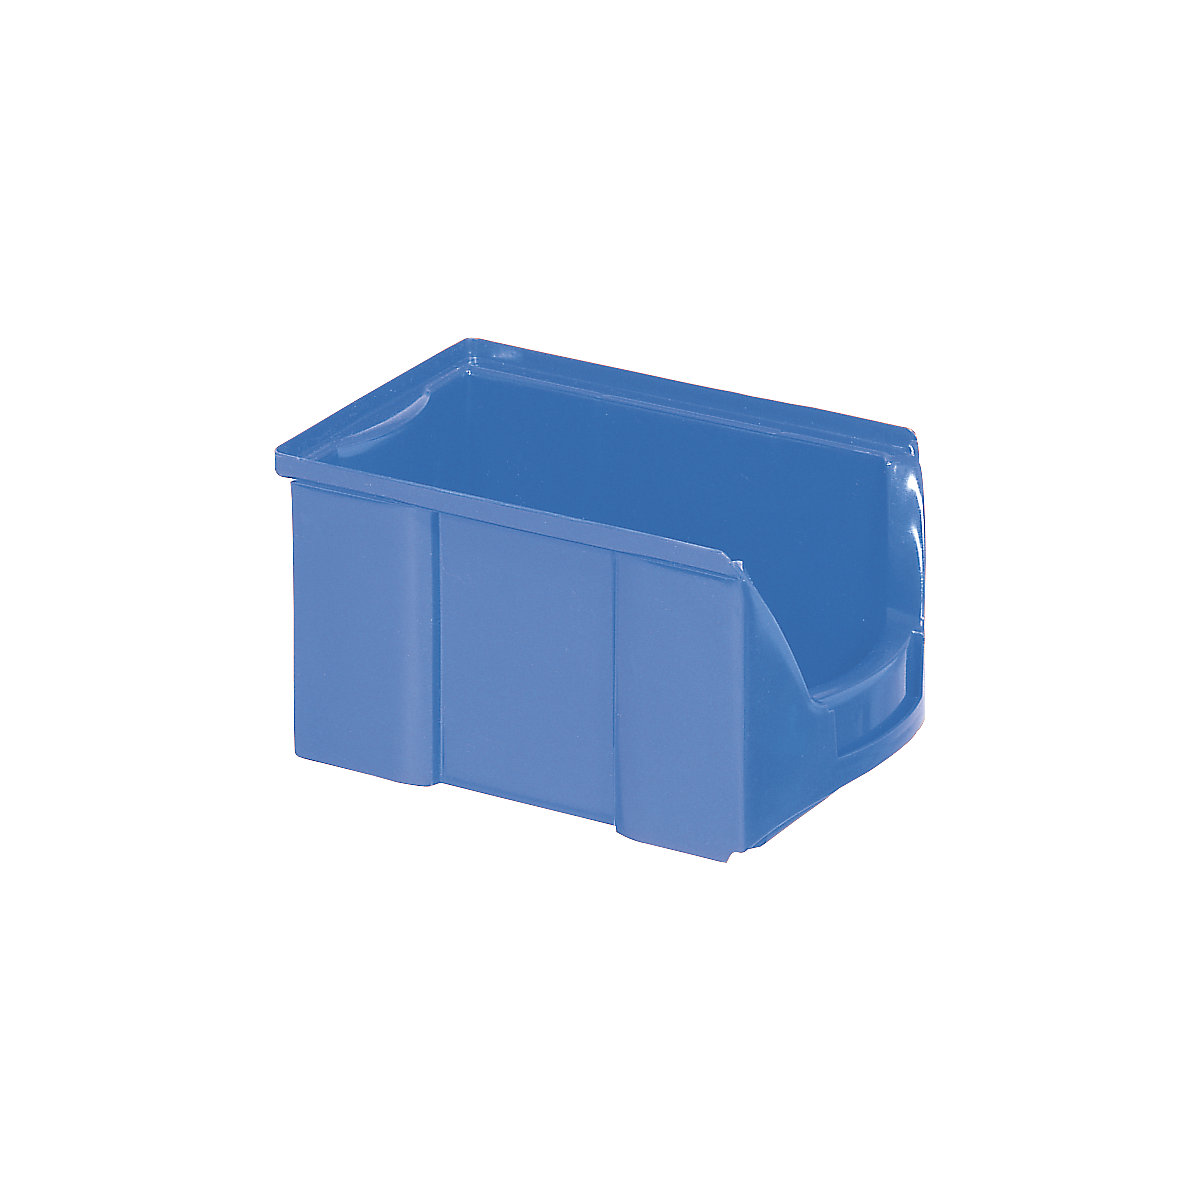 FUTURA open fronted storage bin made of polyethylene, LxWxH 229 x 148 x 122 mm, pack of 25, blue-15